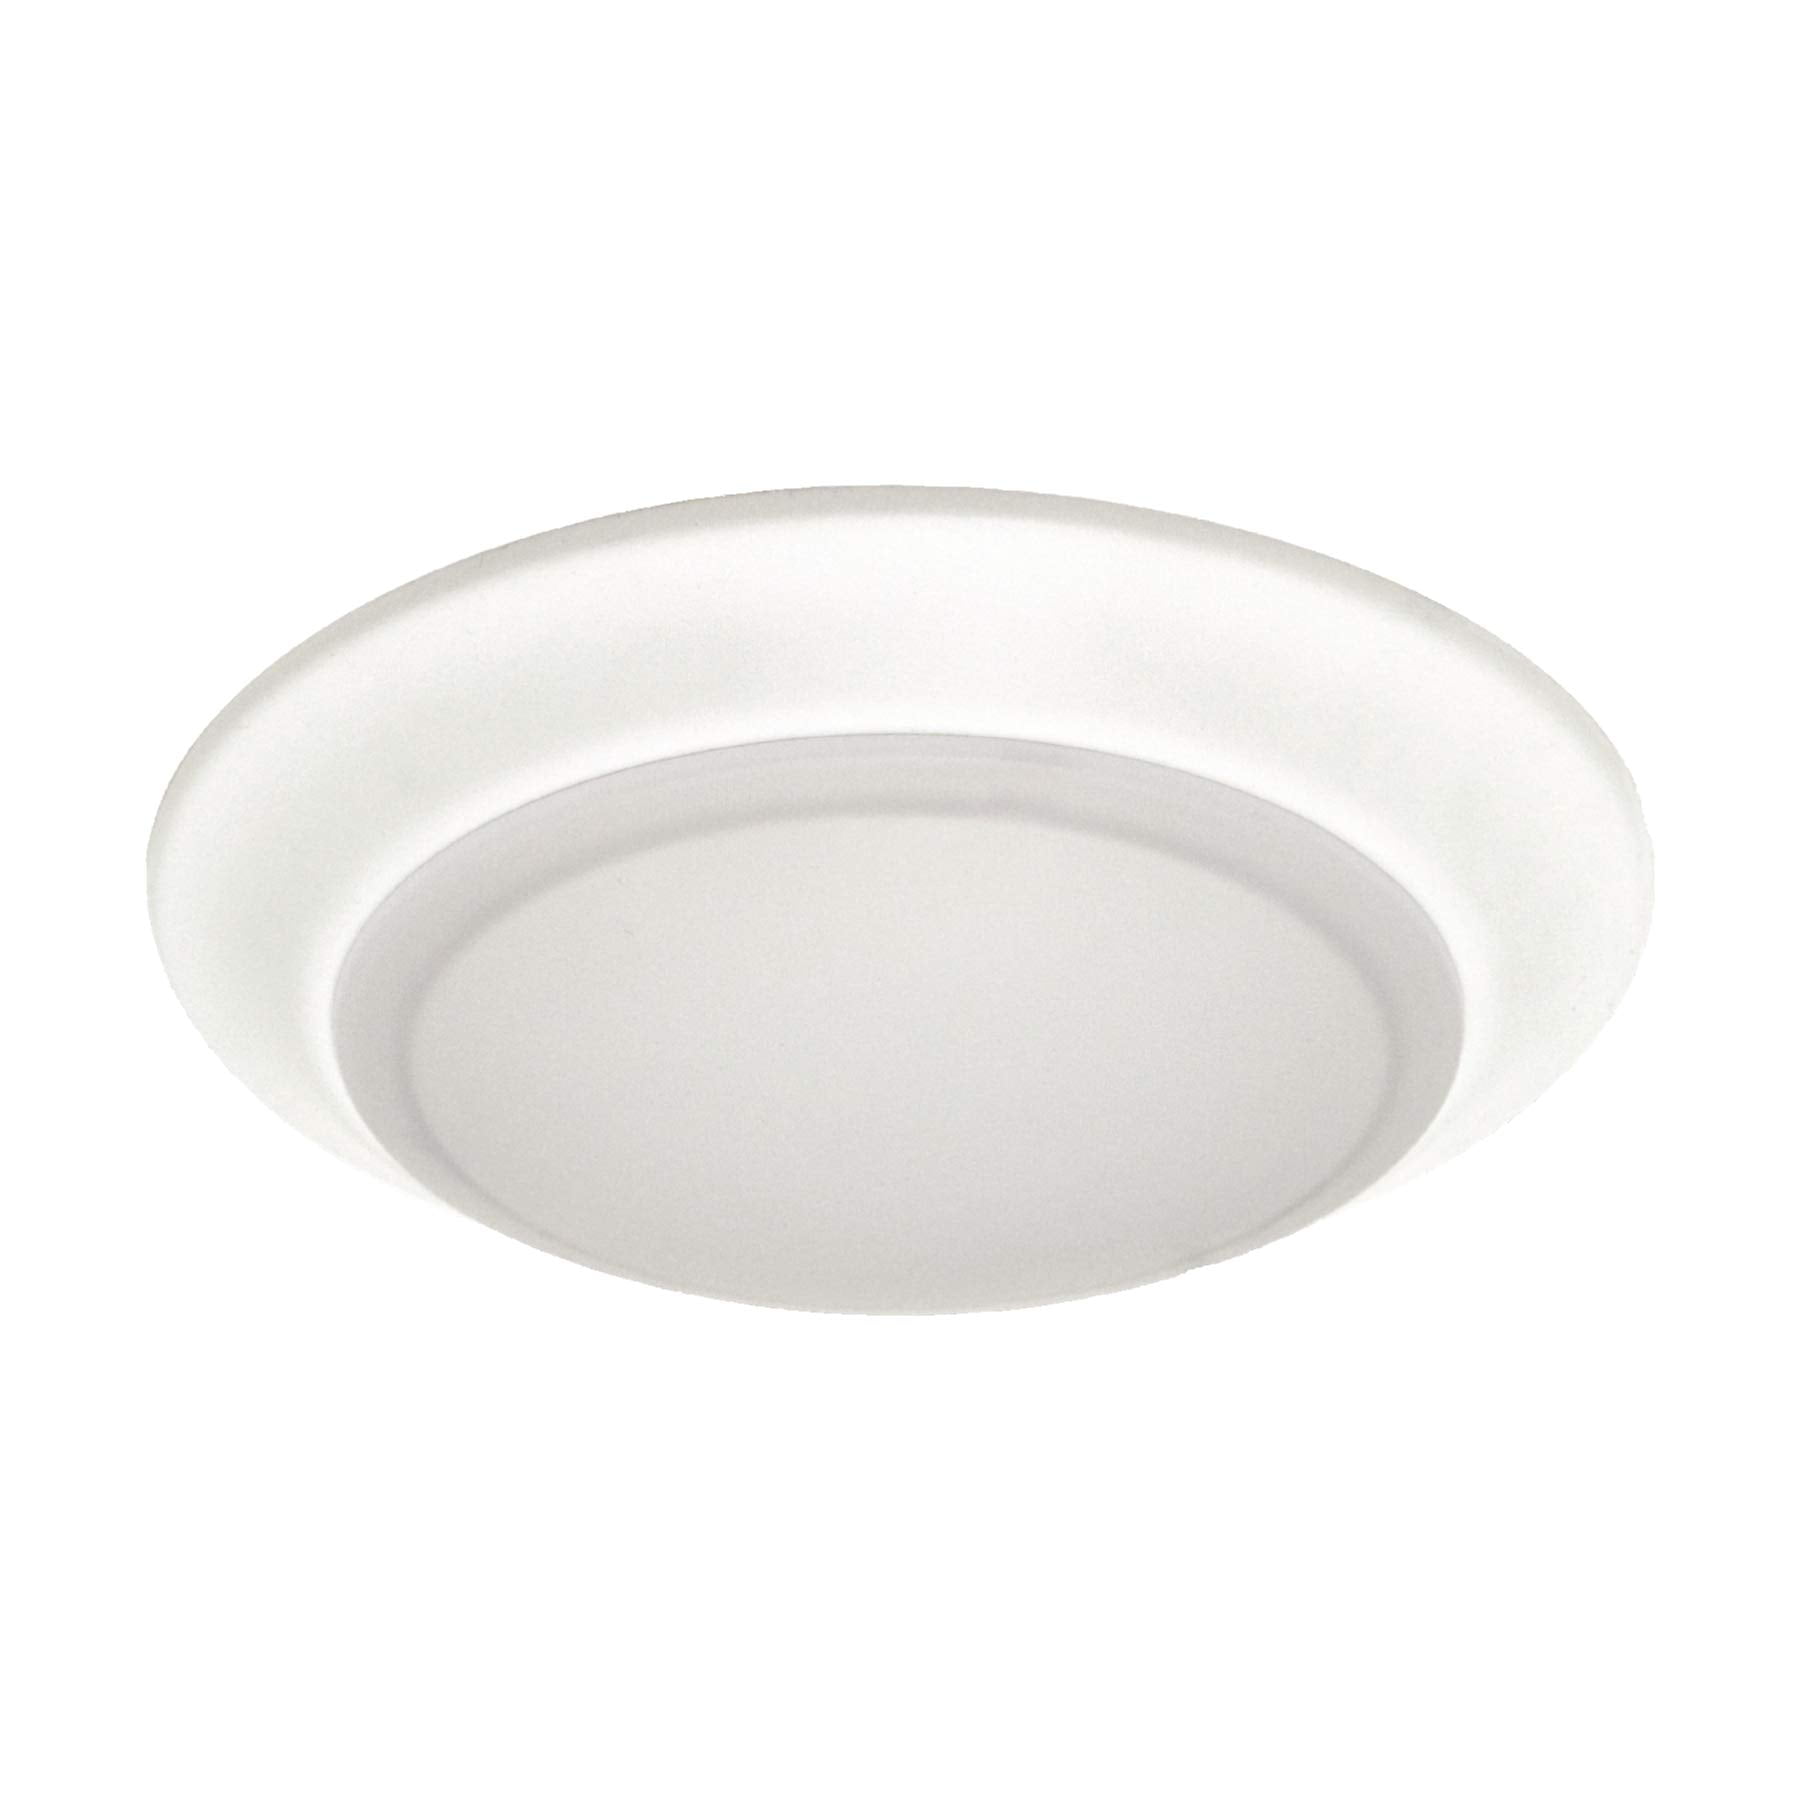 DUNO LED 15W Neutral White Bulkhead Office Surface Wall Ceiling Mounted Light